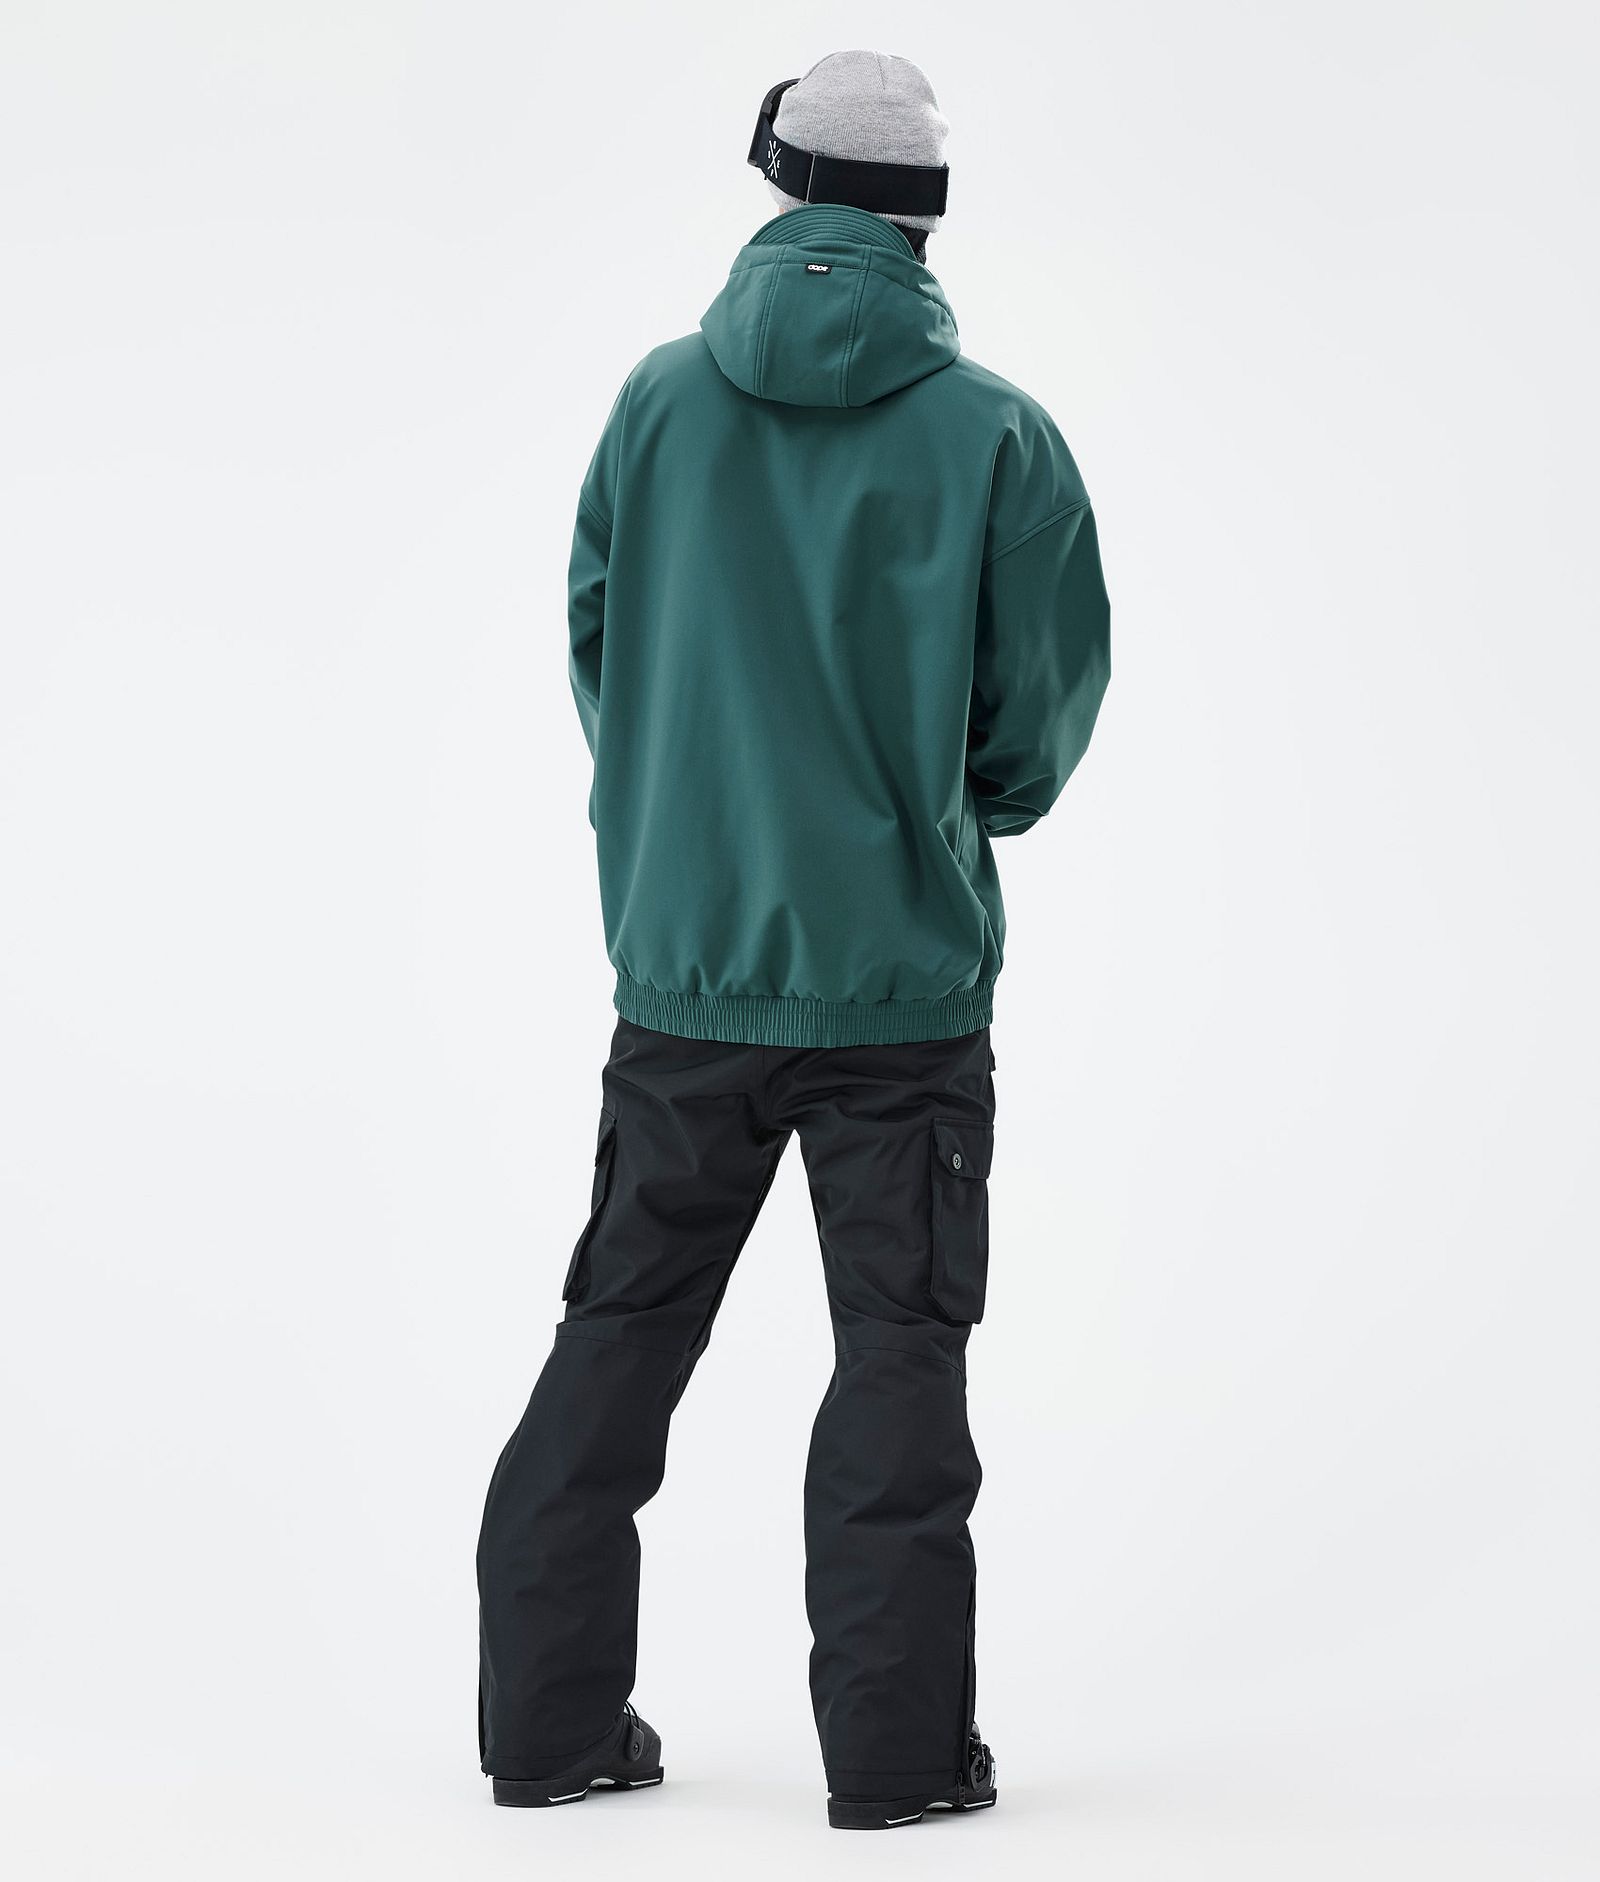 Dope Cyclone Outfit Ski Homme Bottle Green/Blackout, Image 2 of 2